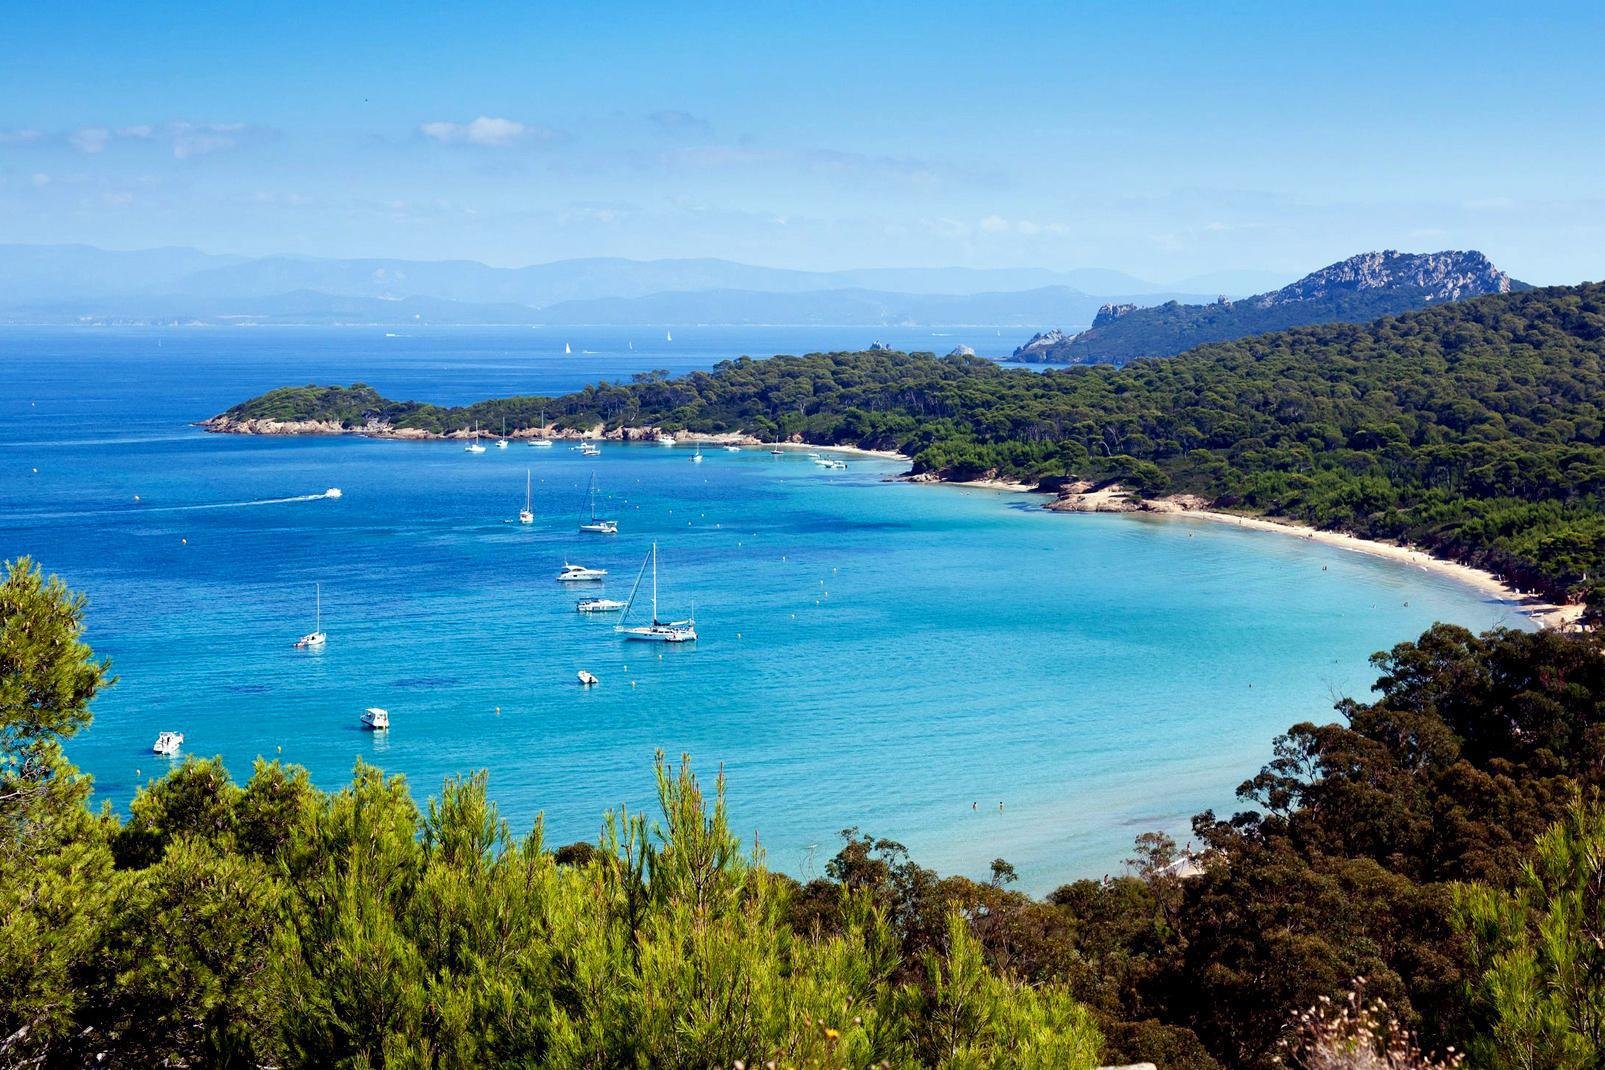 A relatively unknown island to foreigners, Porquerolles is located off the coast of Hyères in the south of France. It is the largest and most westerly of the three islands that make up what is known as the Iles d'Hyères, which also include Port-Cros and the Ile du Levant. Enjoying over 300 days of sunshine per year, the island enjoys a varied landscape despite its size (just under five square miles). ...